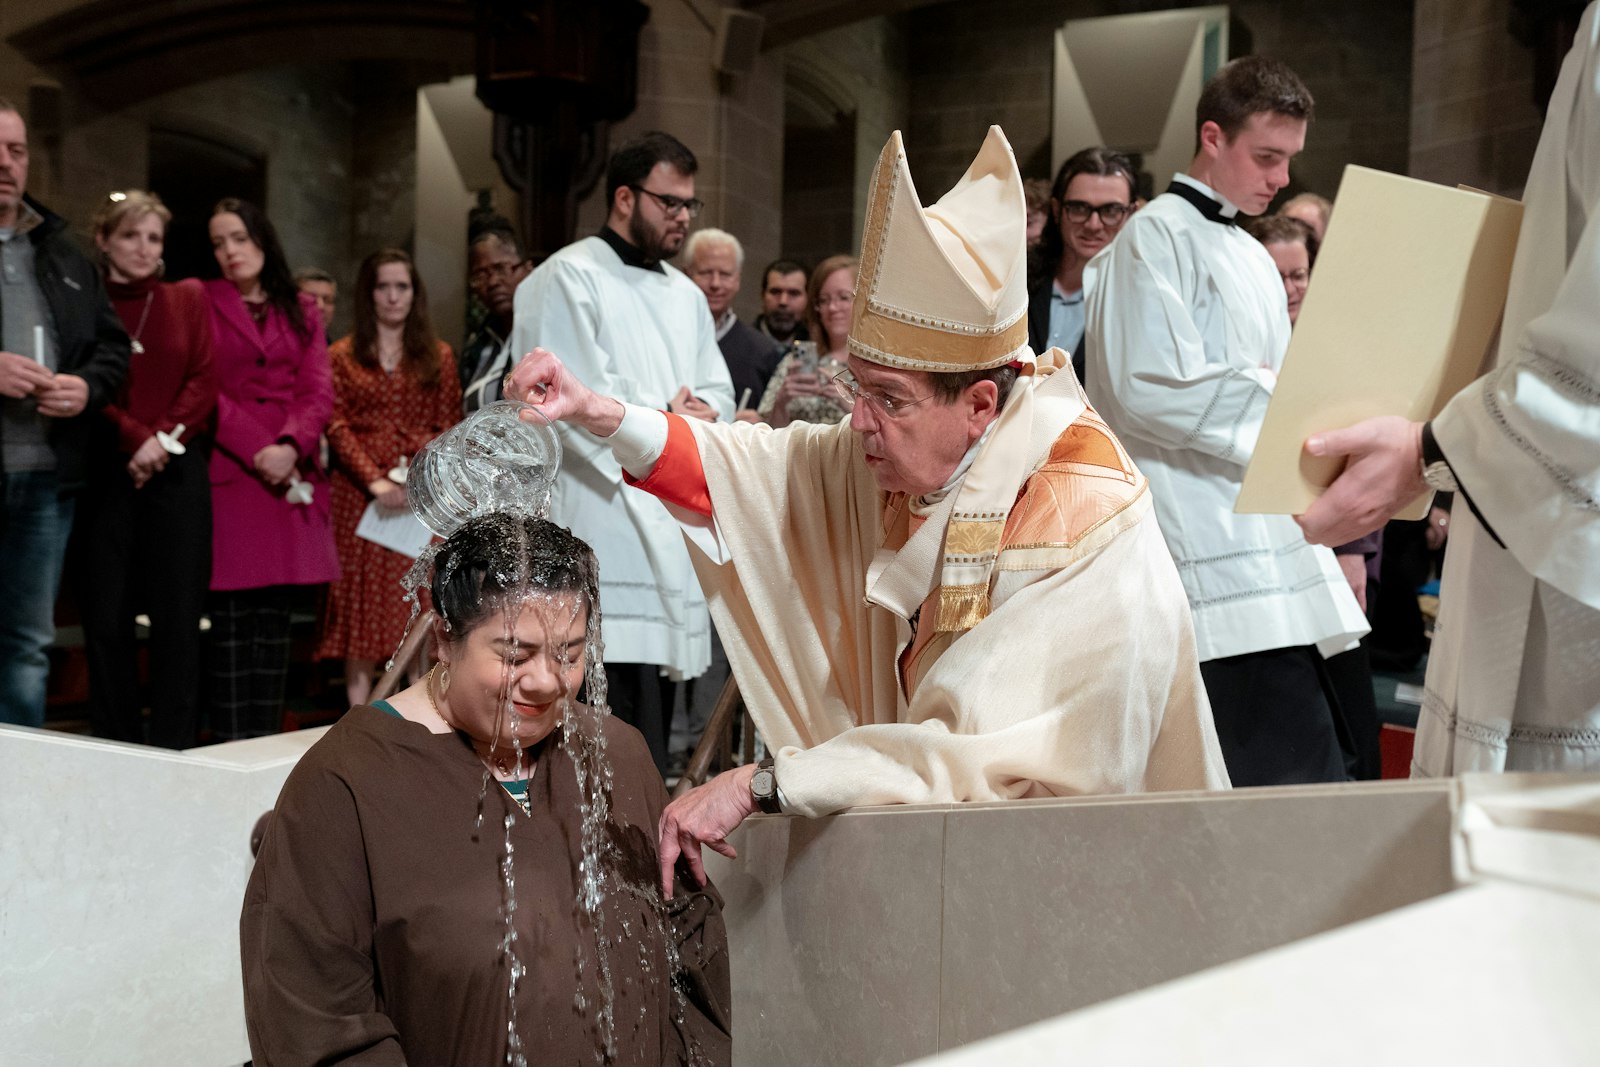 Archbishop Vigneron baptizes one of the six catechumens from the Resurget Cineribus Family of Parishes in Detroit. In the Archdiocese of Detroit, 793 people entered full communion with the Church this year.